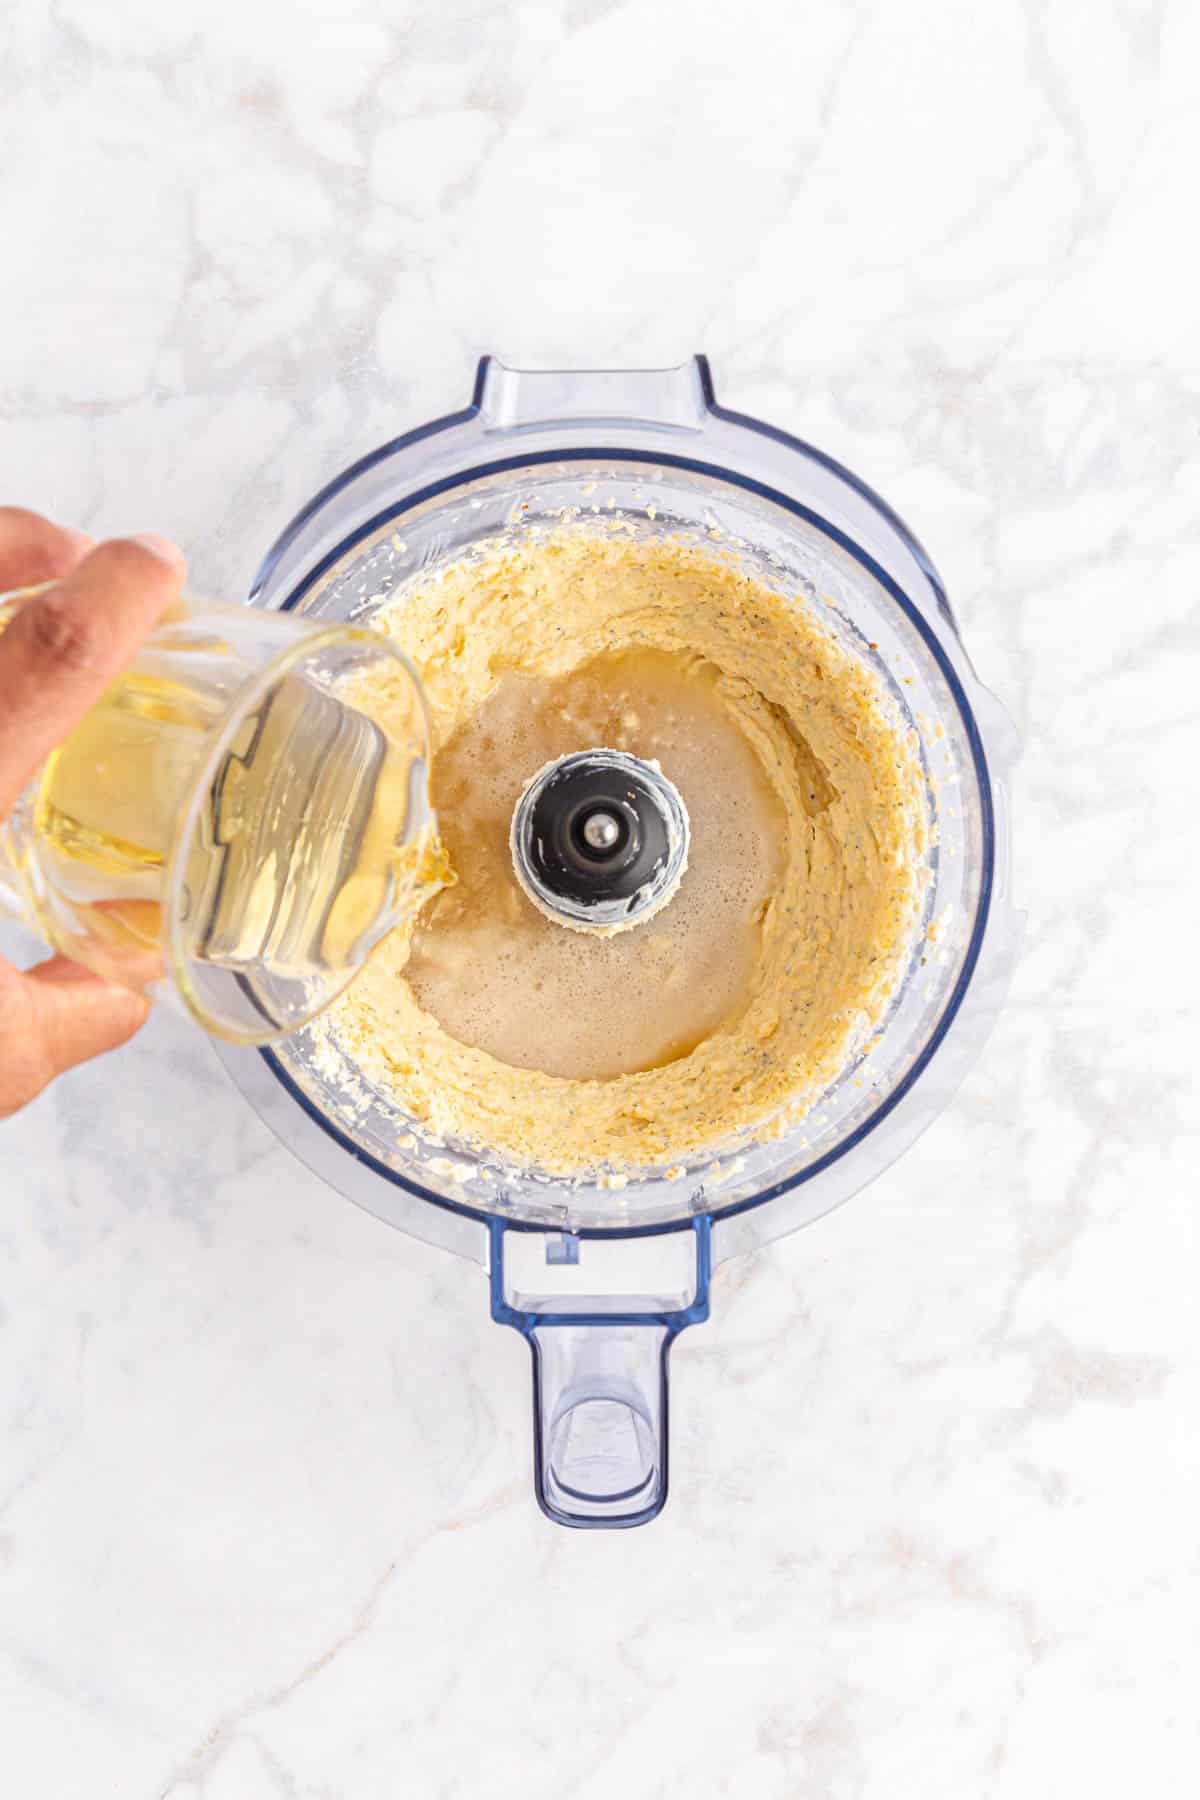 Adding beer to cheese dip in food processor.